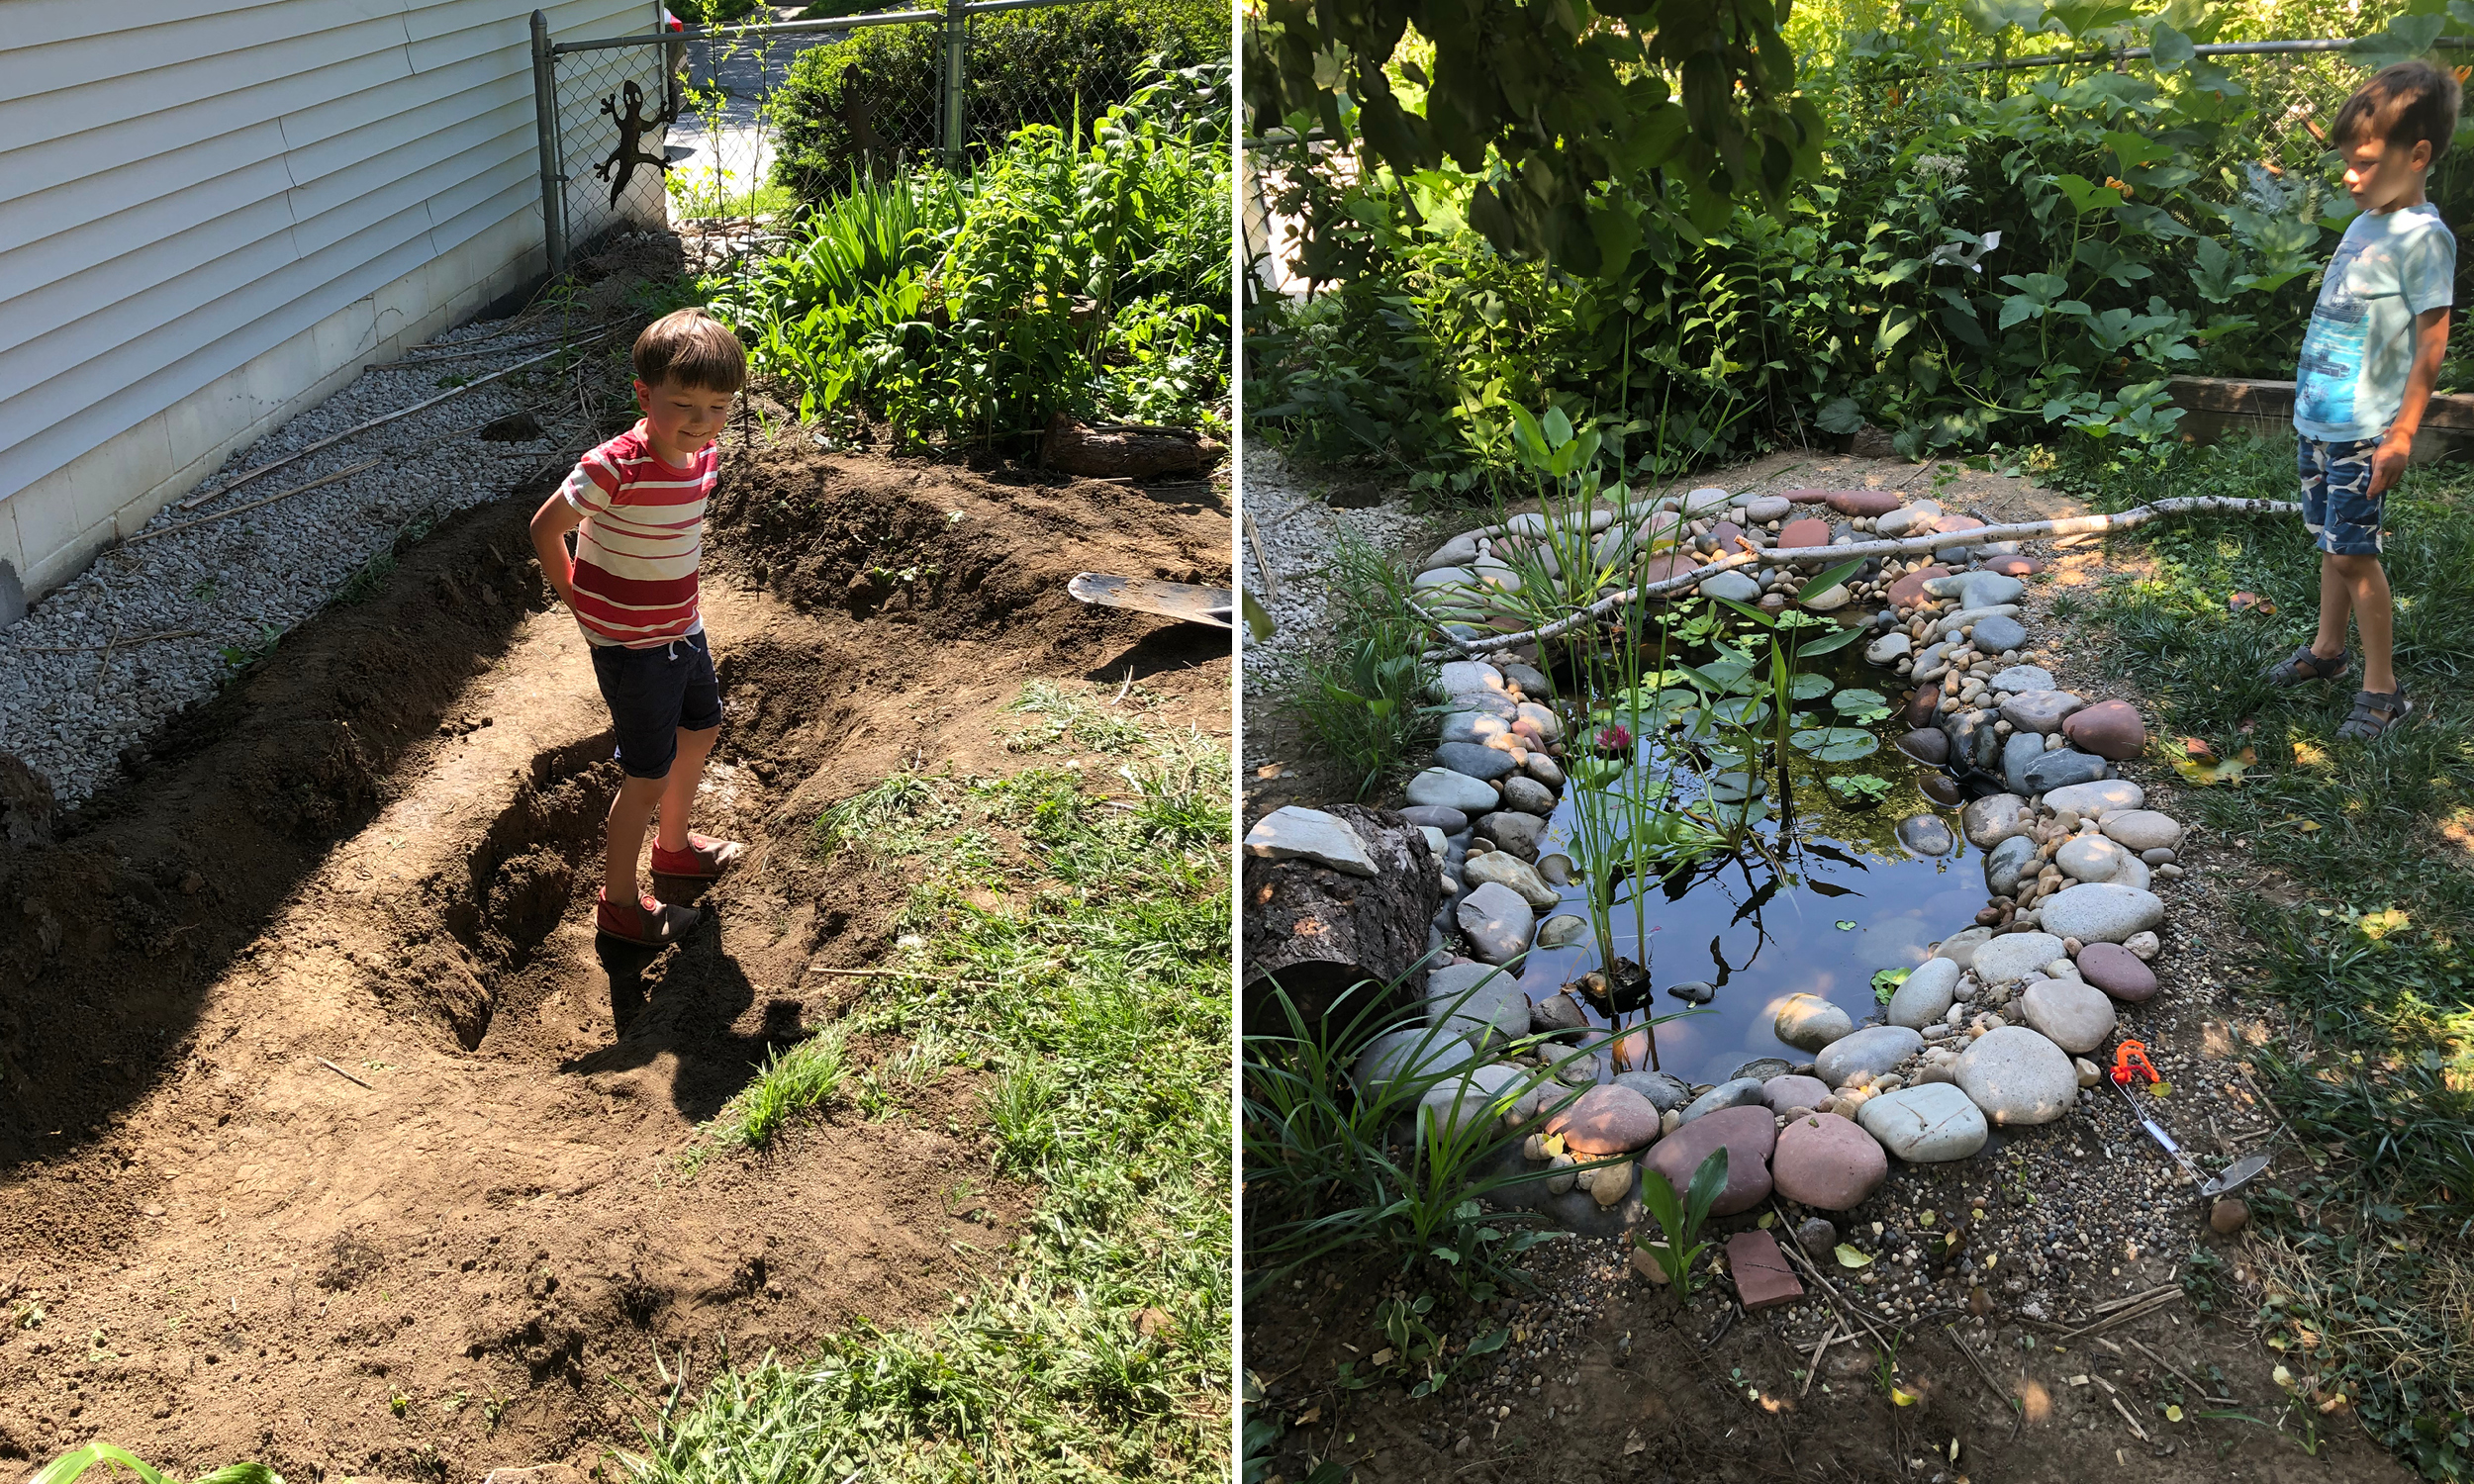 A pair of photos showing the pond while being dug into the bare dirt (left) and the completed pond with lily pads and other plants growing in it (right)